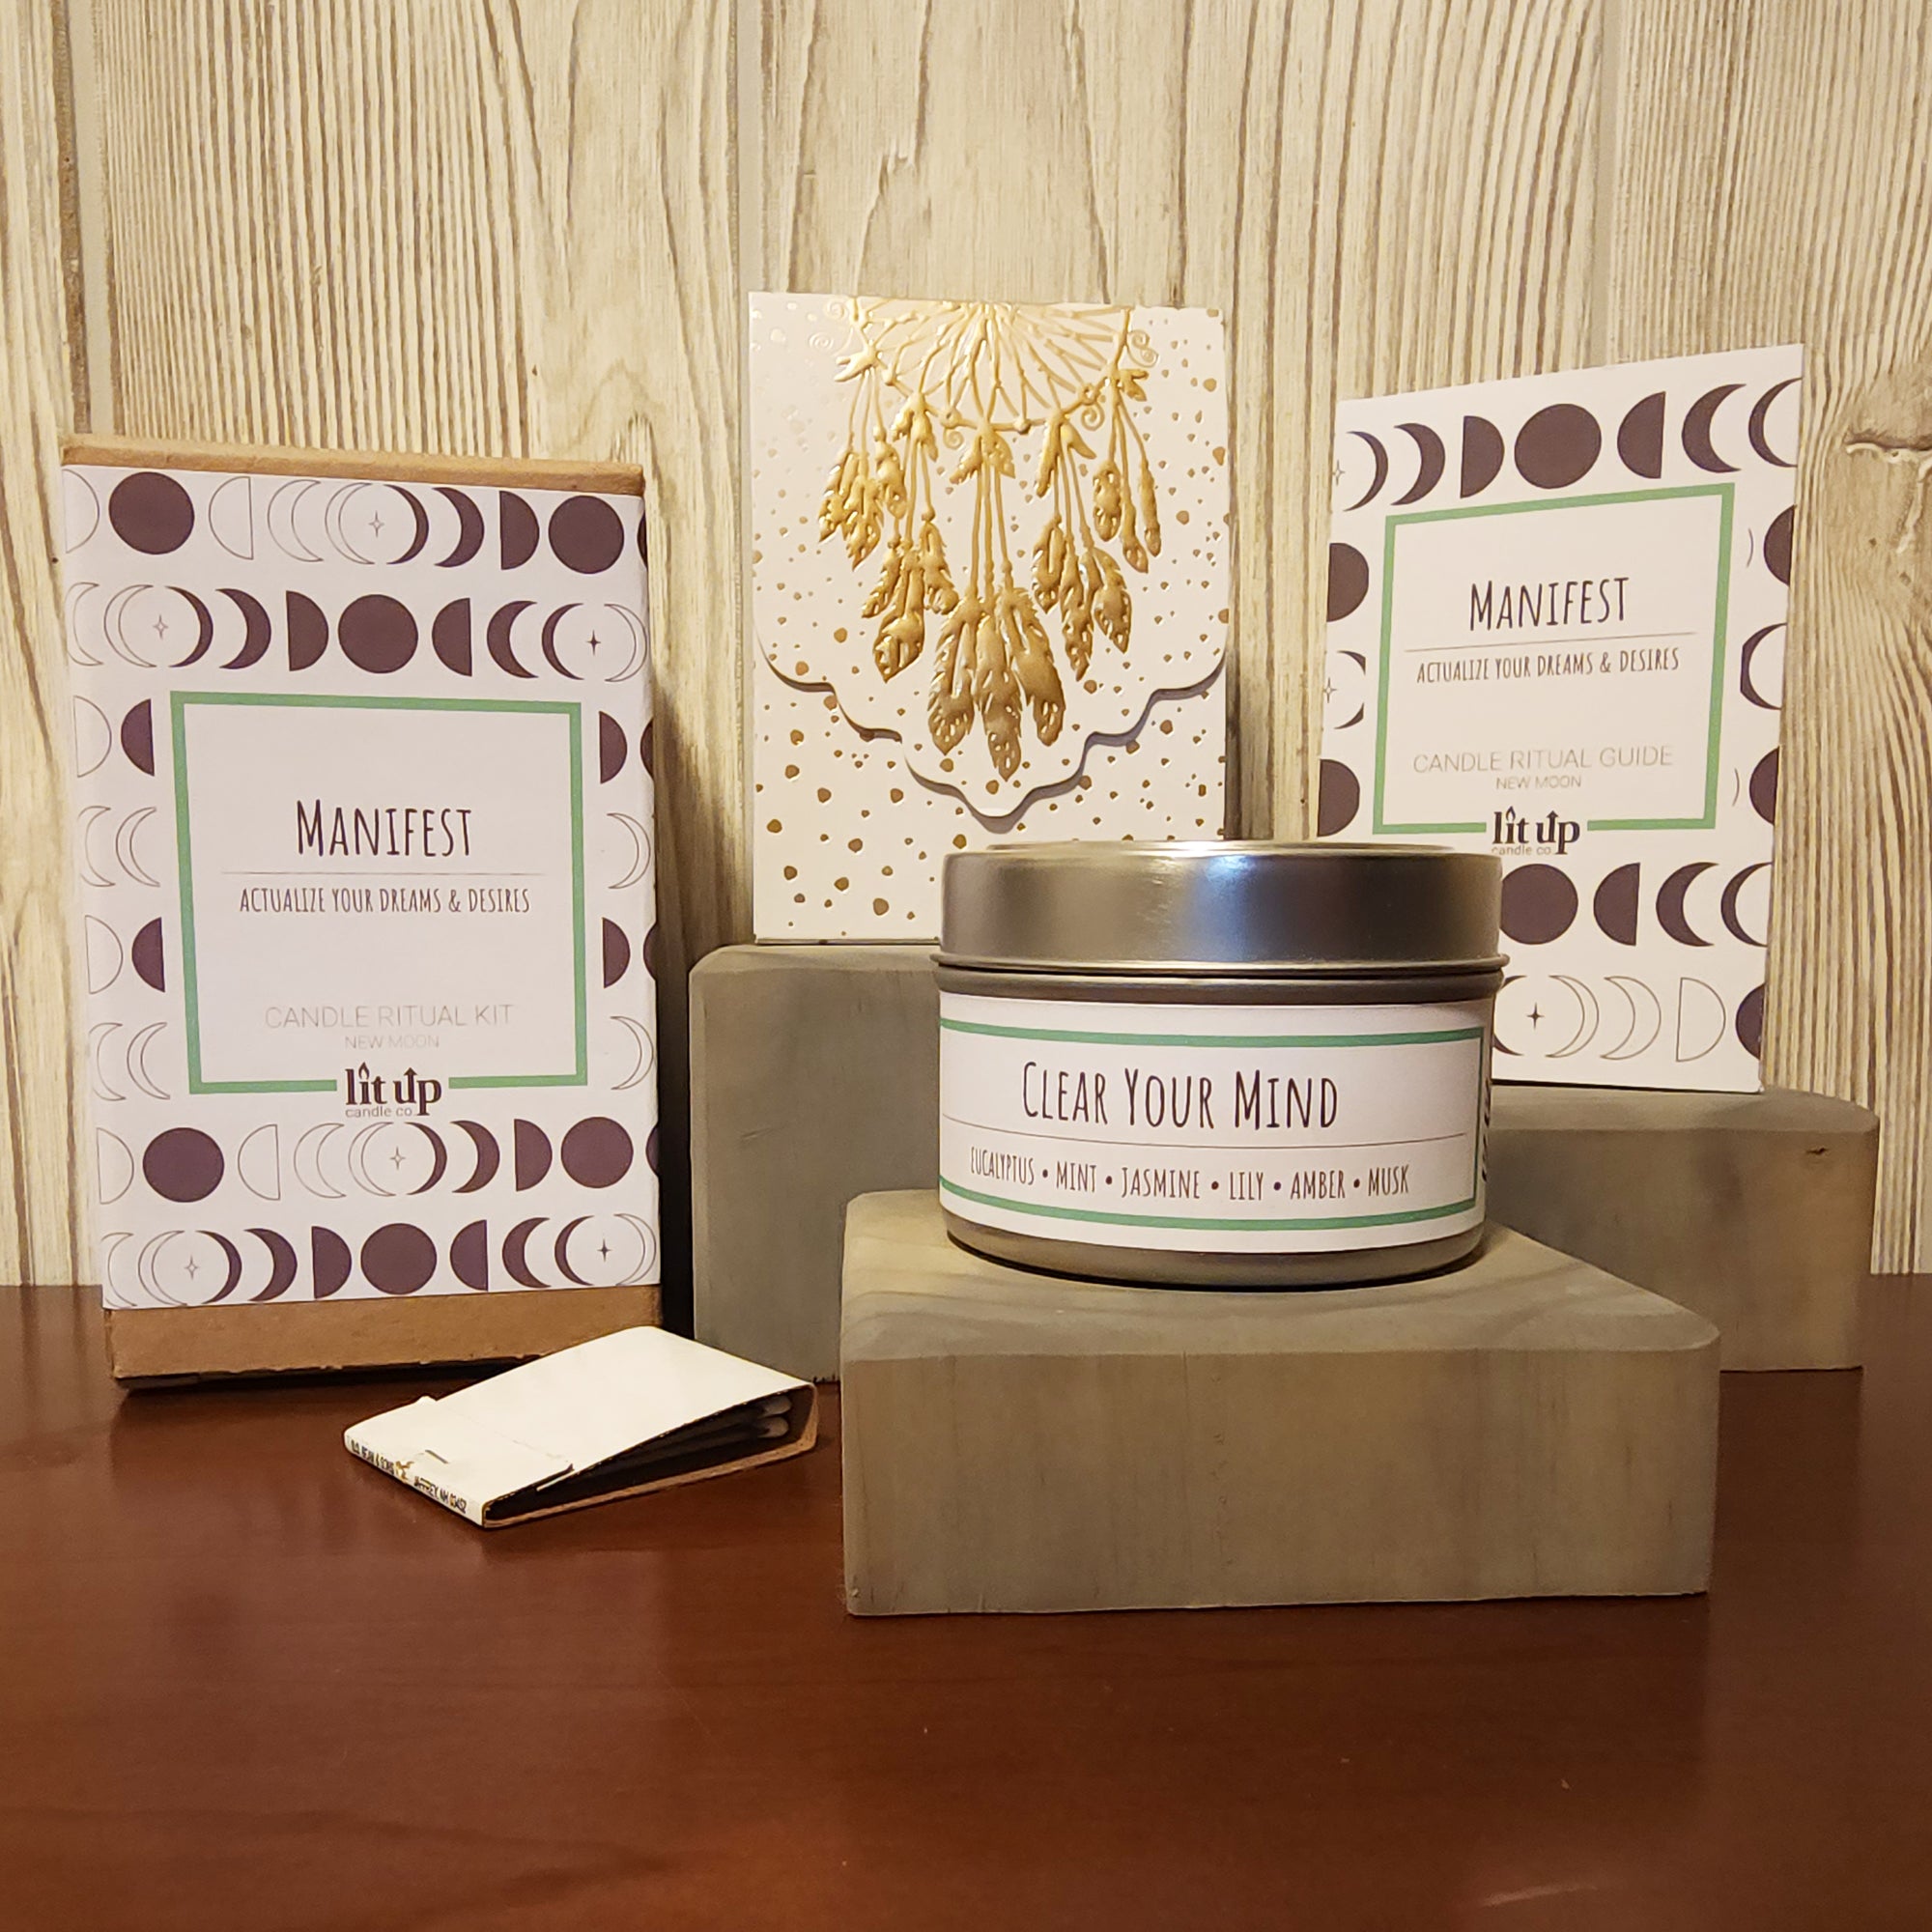 Manifest themed candle ritual kit including Clear Your Mind scented candle, ritual notepad, instructions and matches.